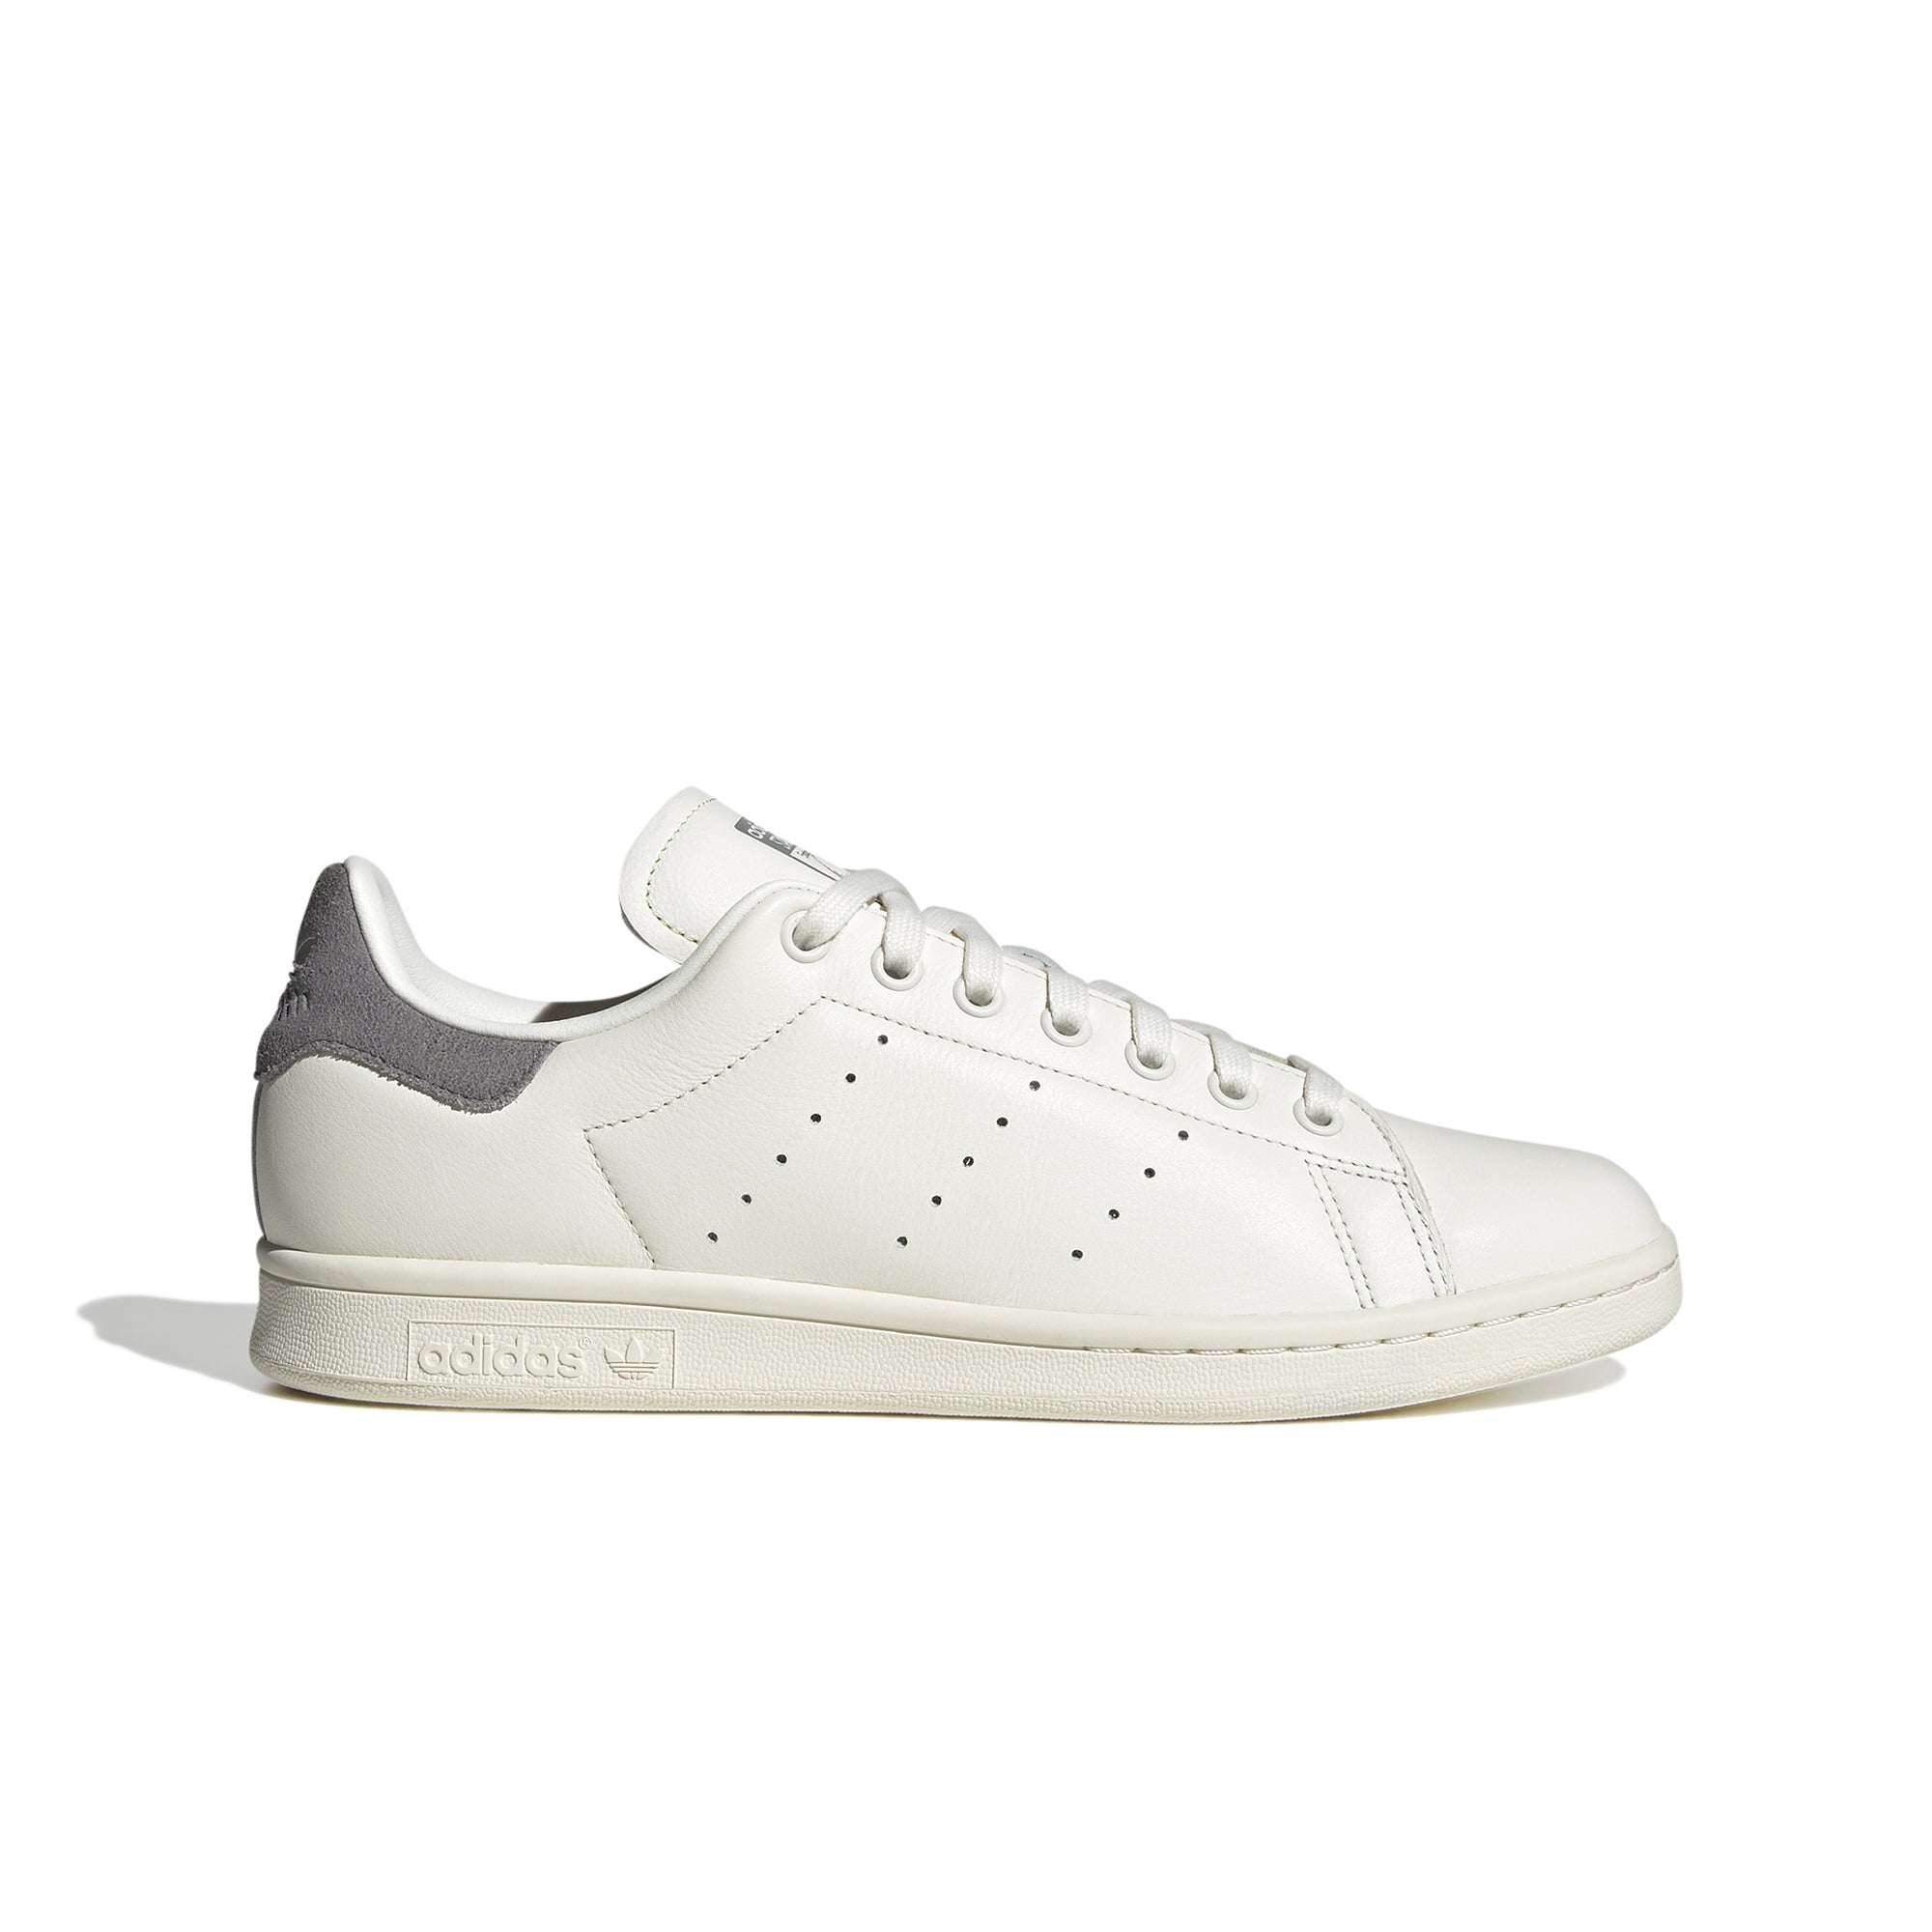 Stan Smith Shoes GY0028